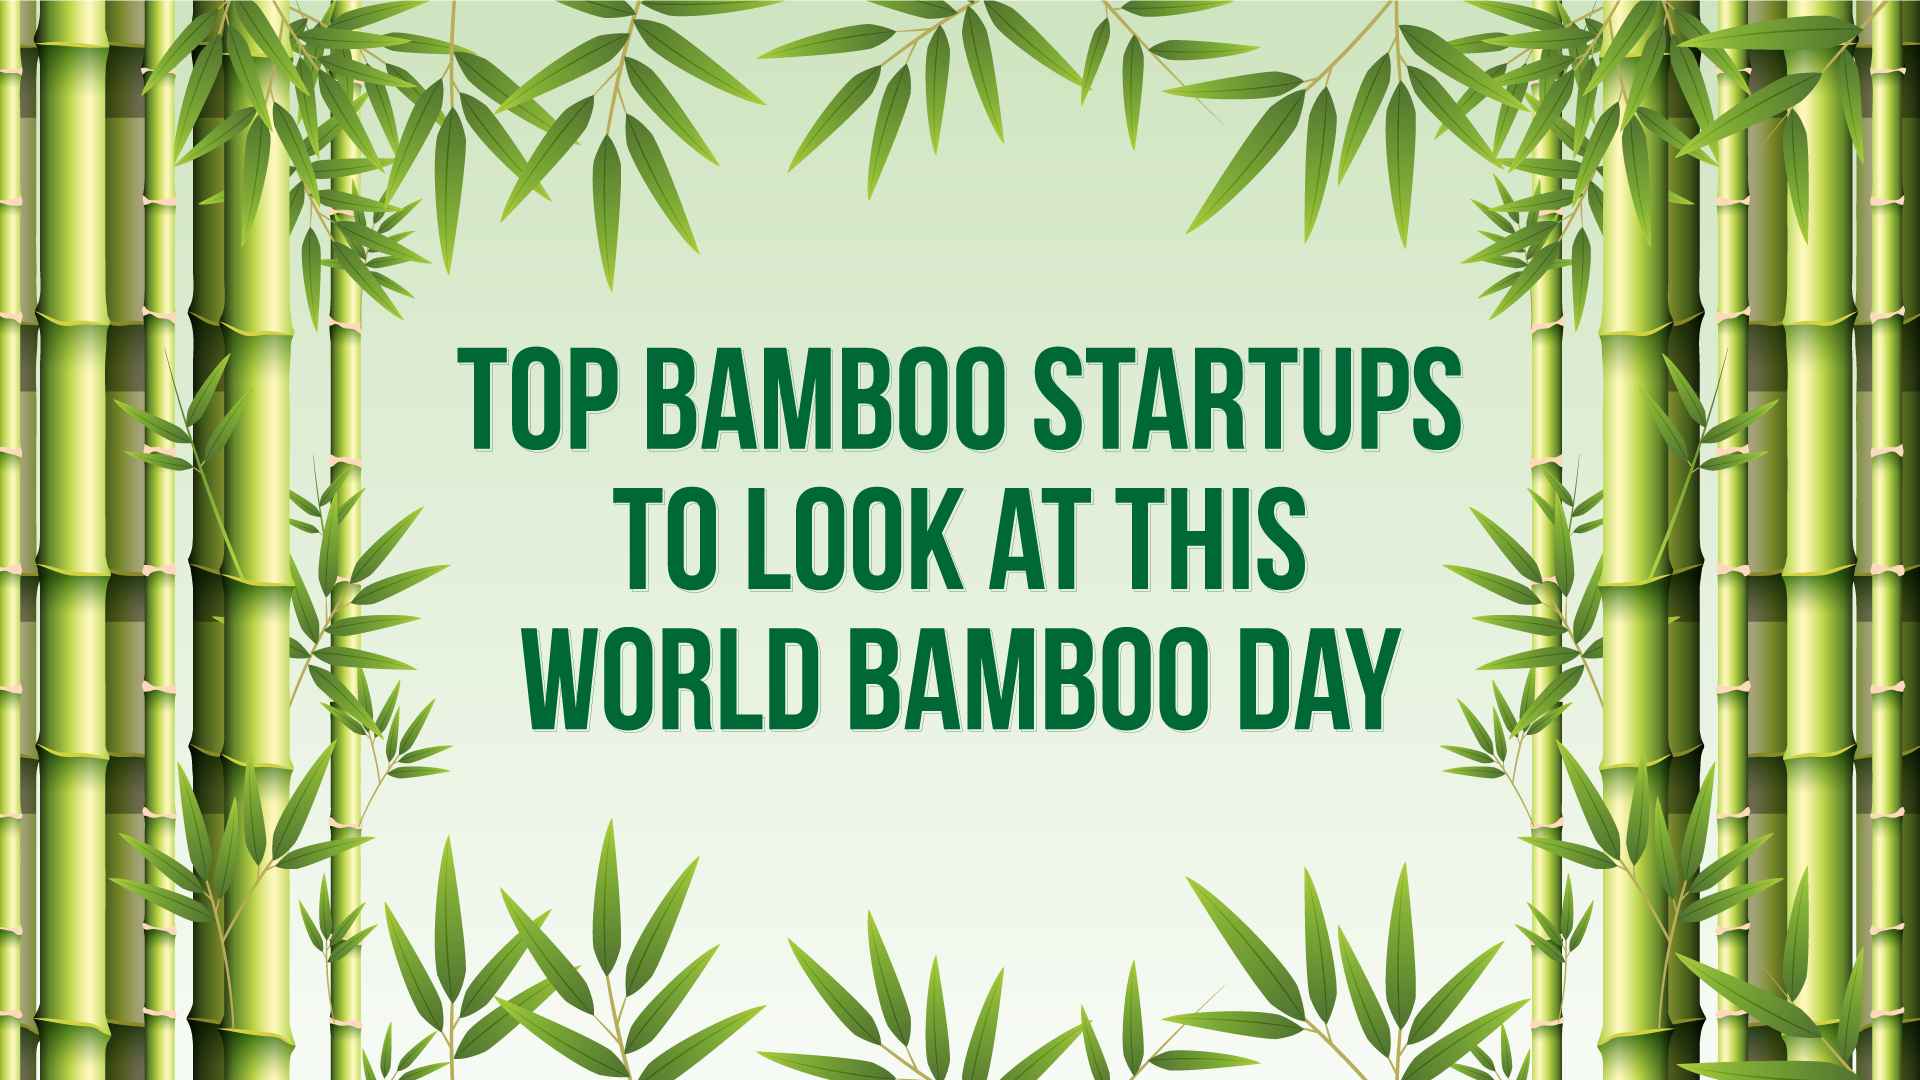 No Brand Has Successfully Turned Bamboo Into A High-Performance